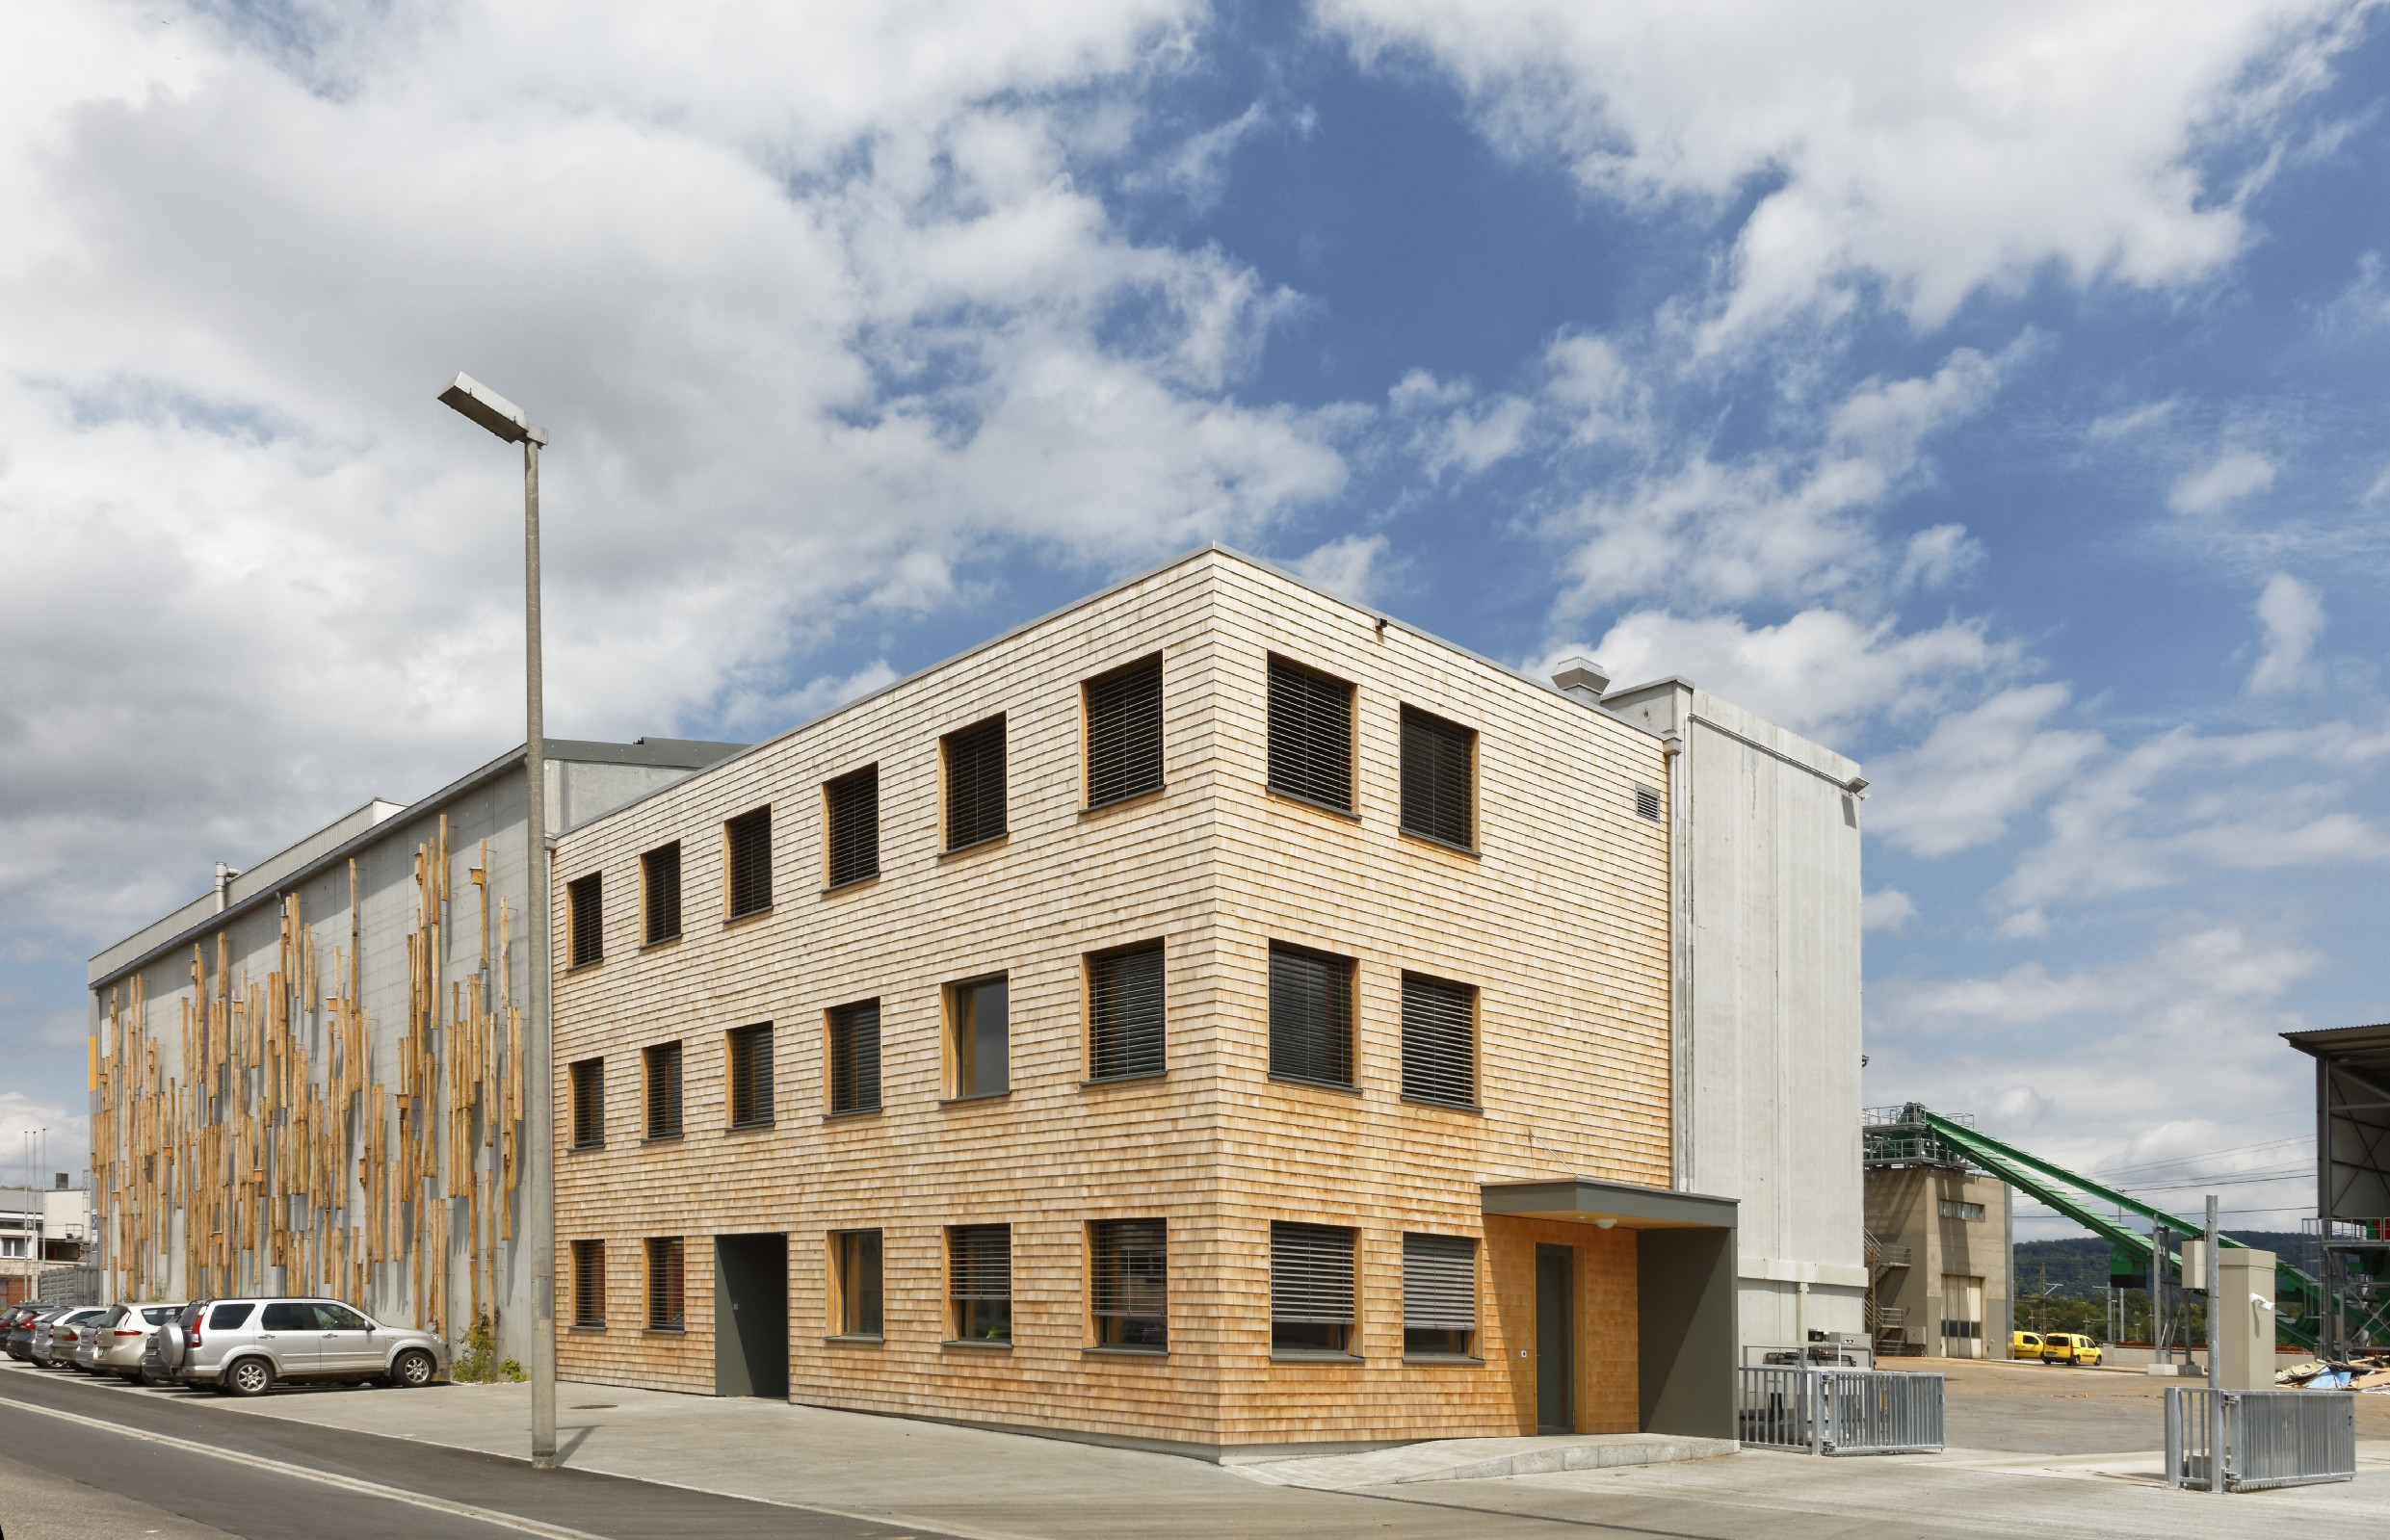 The three-storey office building housing the Energieholz-Zentrum in Muttenz is a timber-frame construction that could be extende